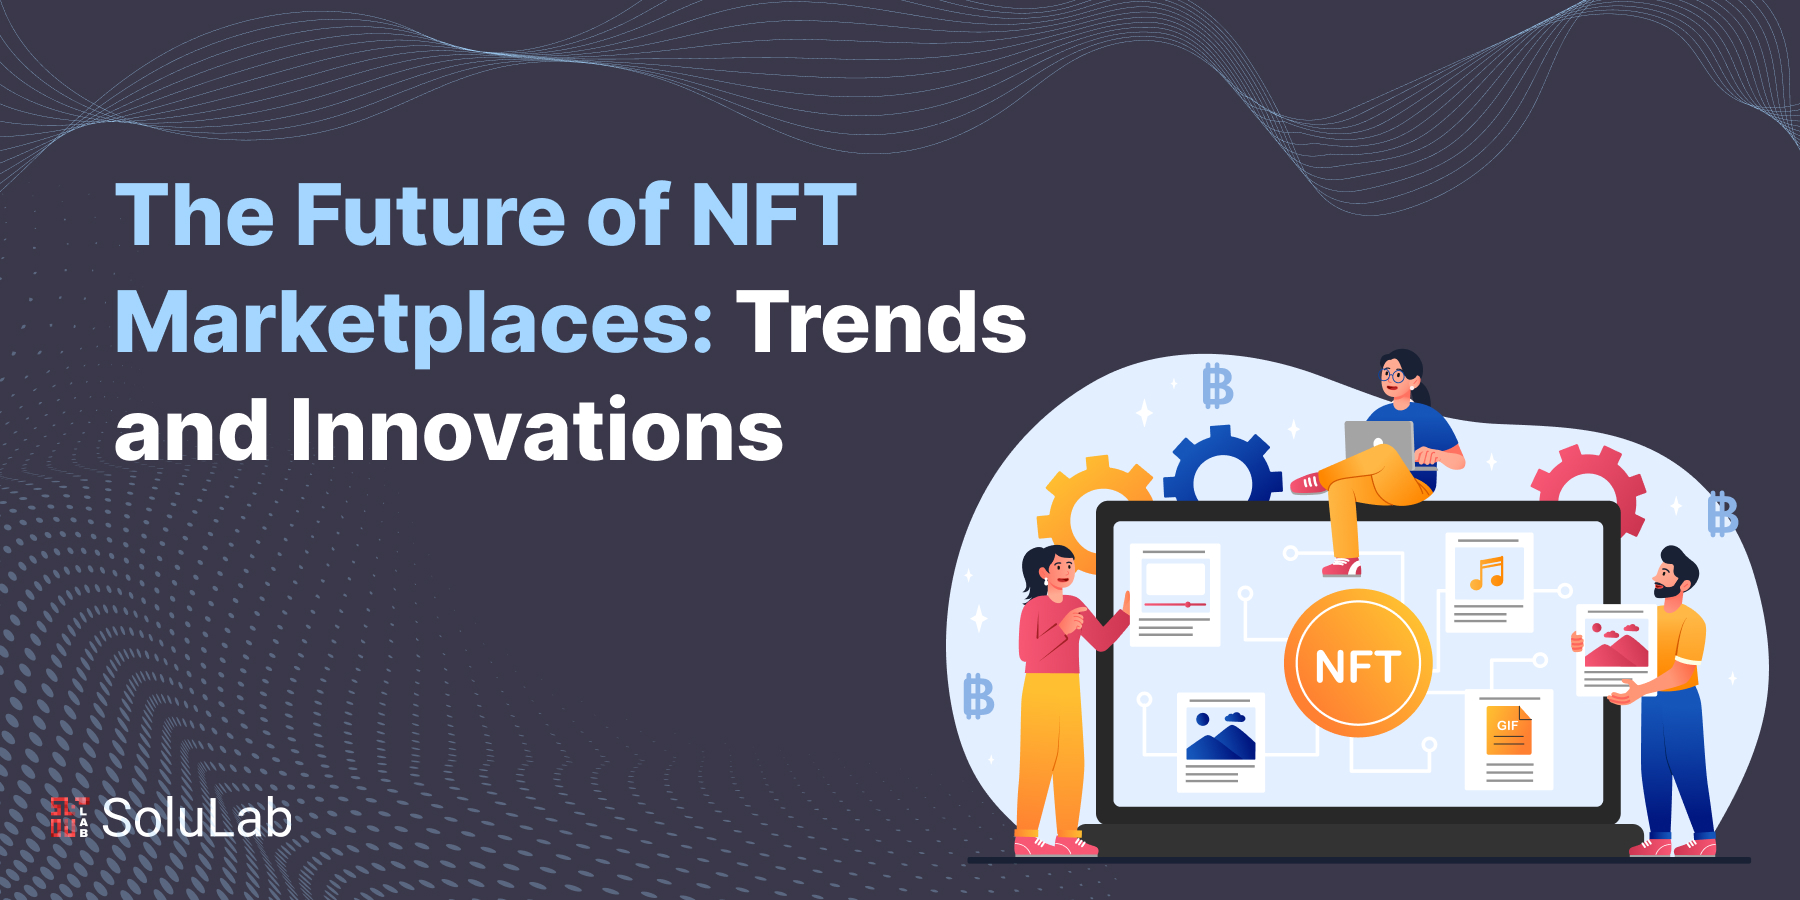 The Future of NFT Marketplaces: Trends and Innovations